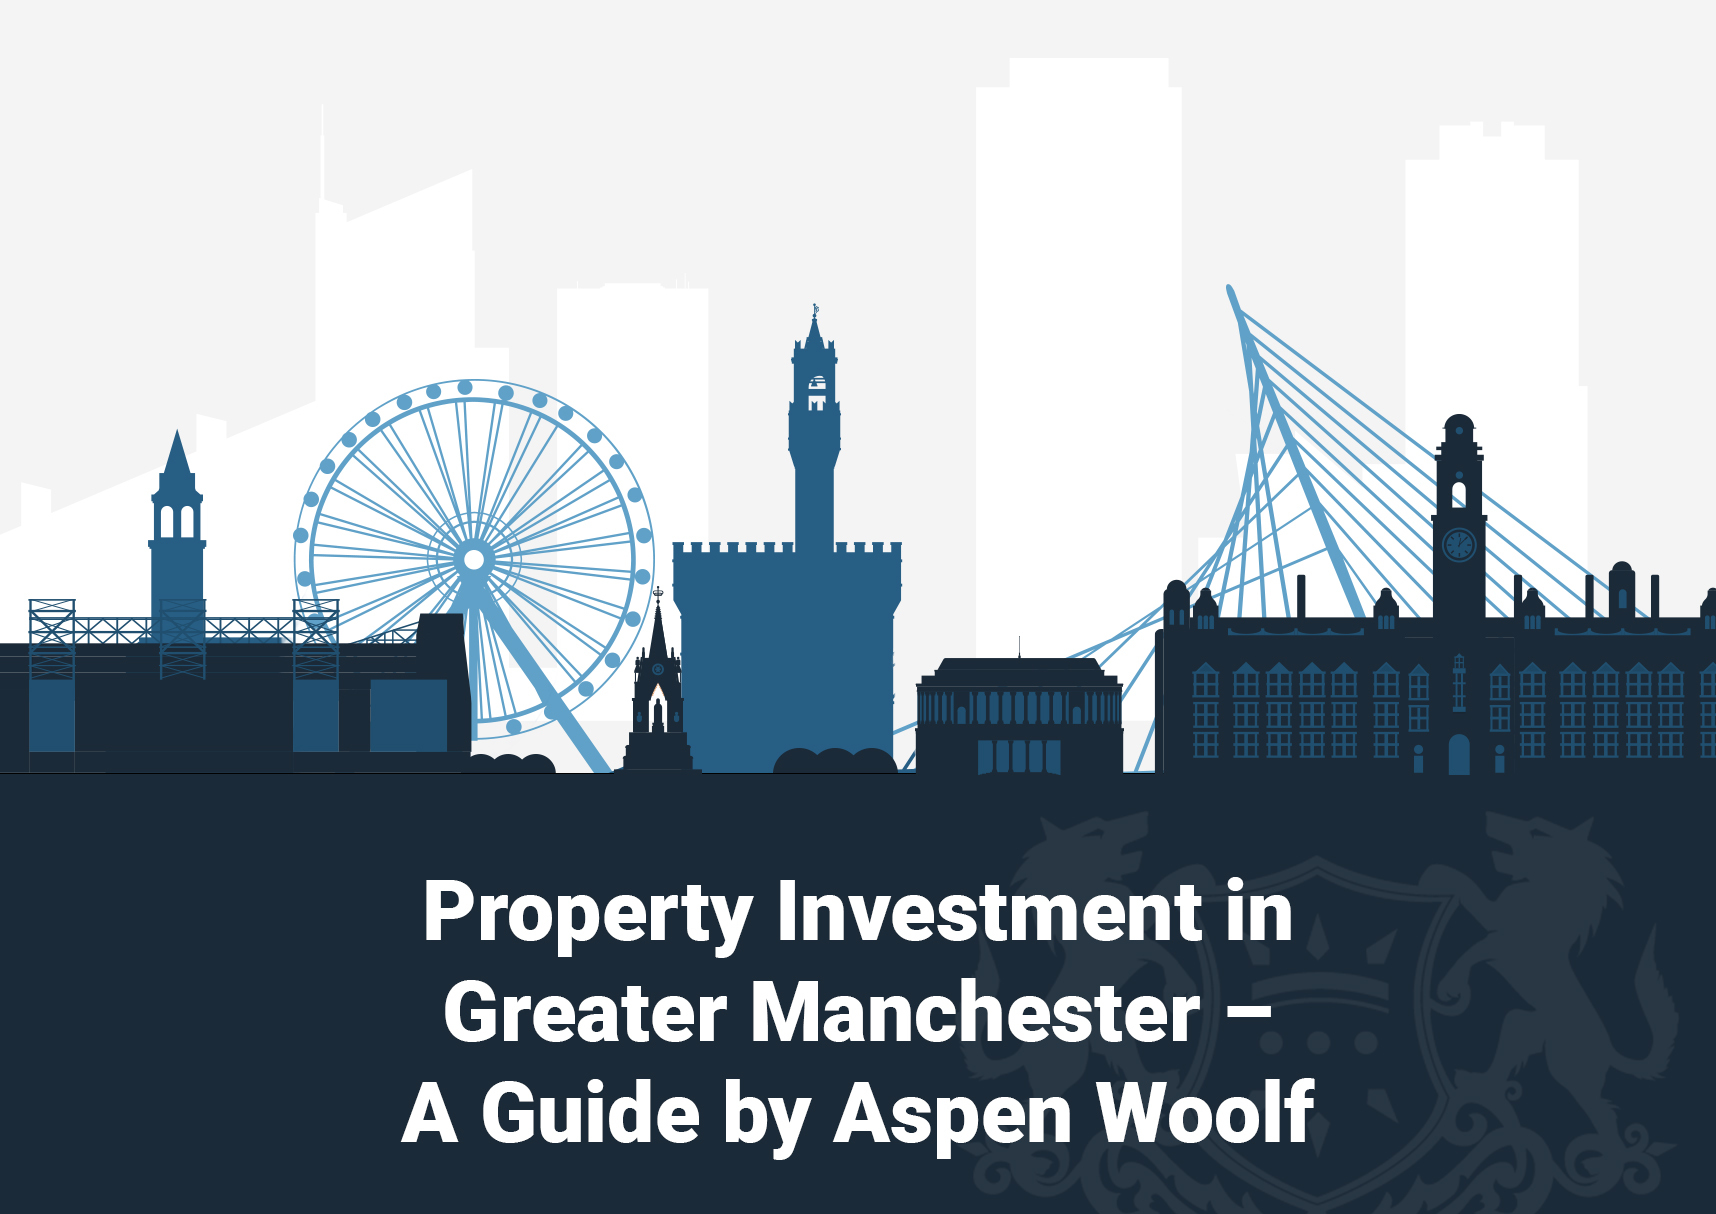 Property Investment in Greater Manchester – A Guide by Aspen Woolf